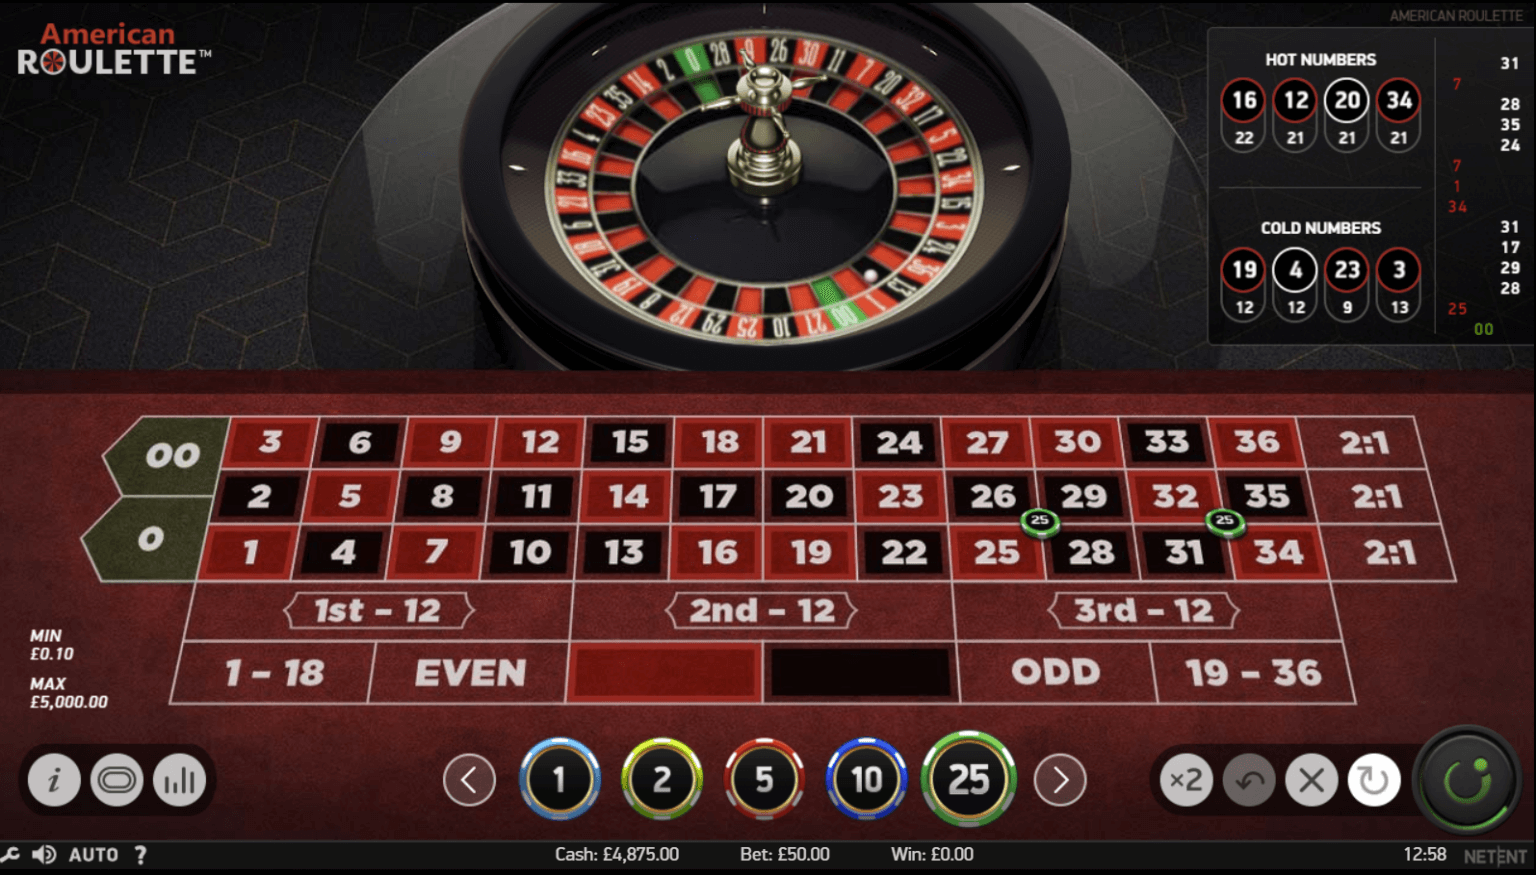 A screenshot of NetEnt's American Roultte casino game. The image shows the betting table and roulette wheel.